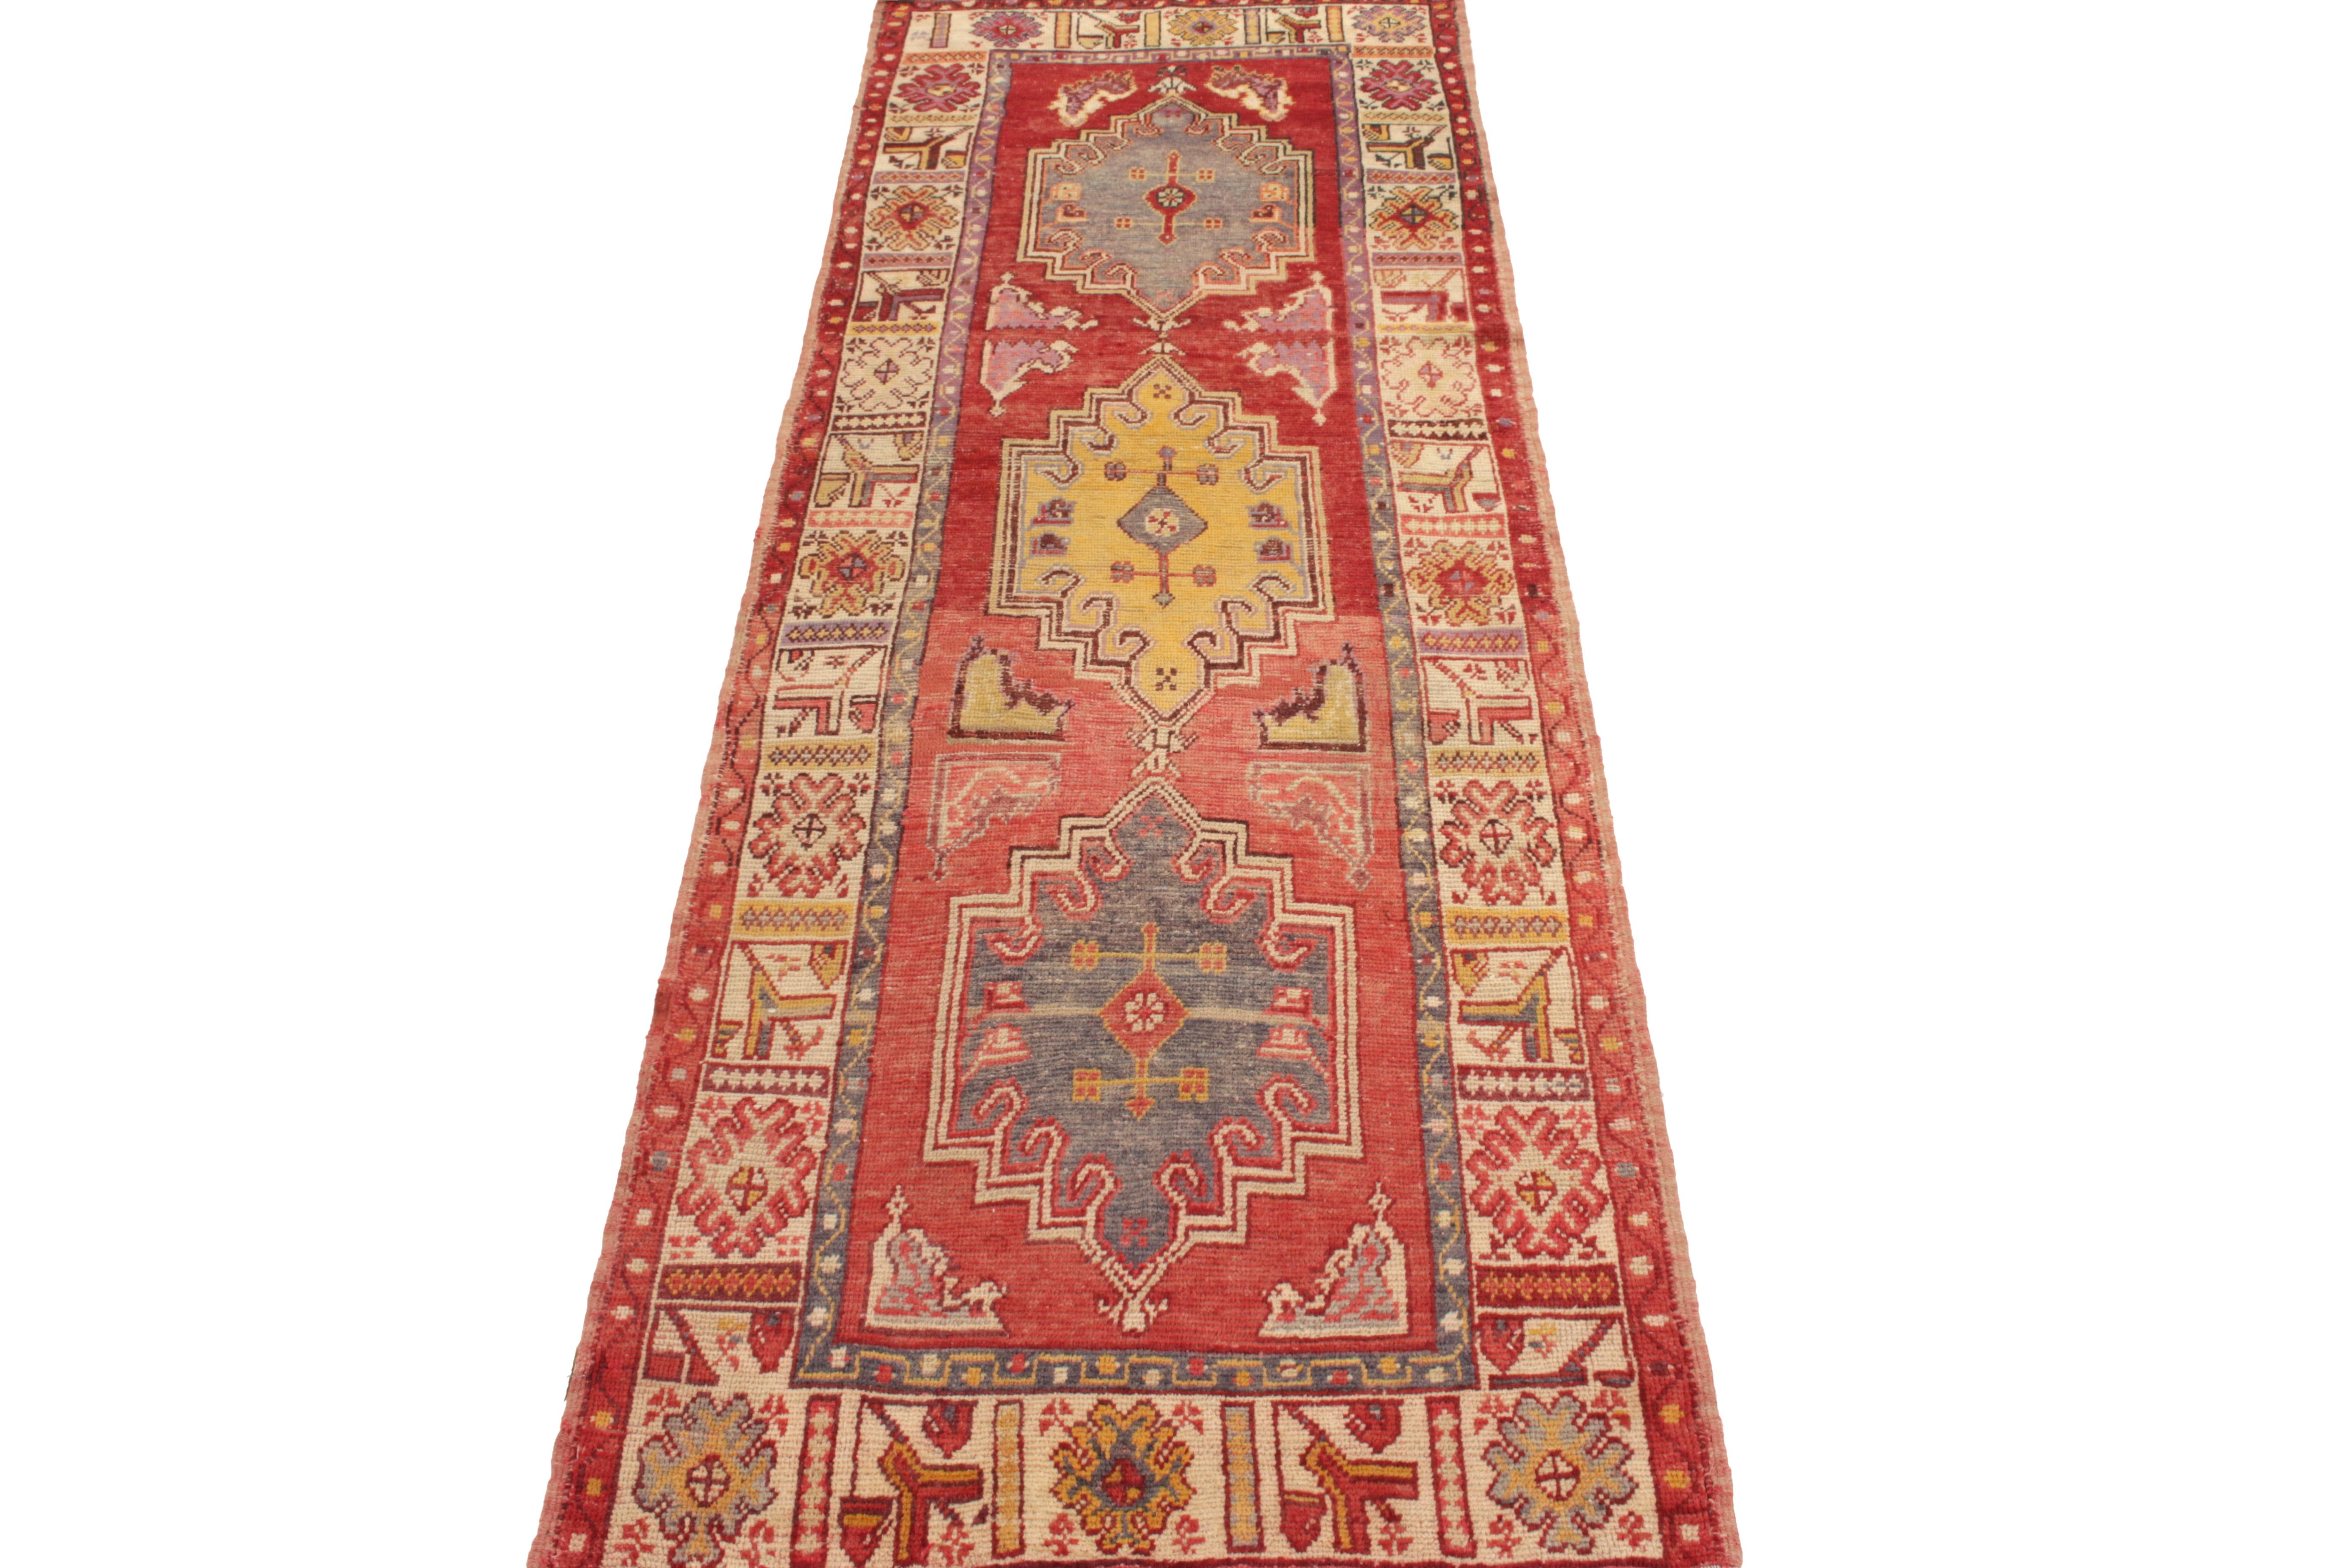 Originating from Turkey circa 1950-1960, a vintage 3 x 9 mid-century pile runner connoting Anatolian design lineage. Hand-knotted in wool, deliciou pink-red and bright white frame hues of blue and gold in a regal medallion pattern, complemented by